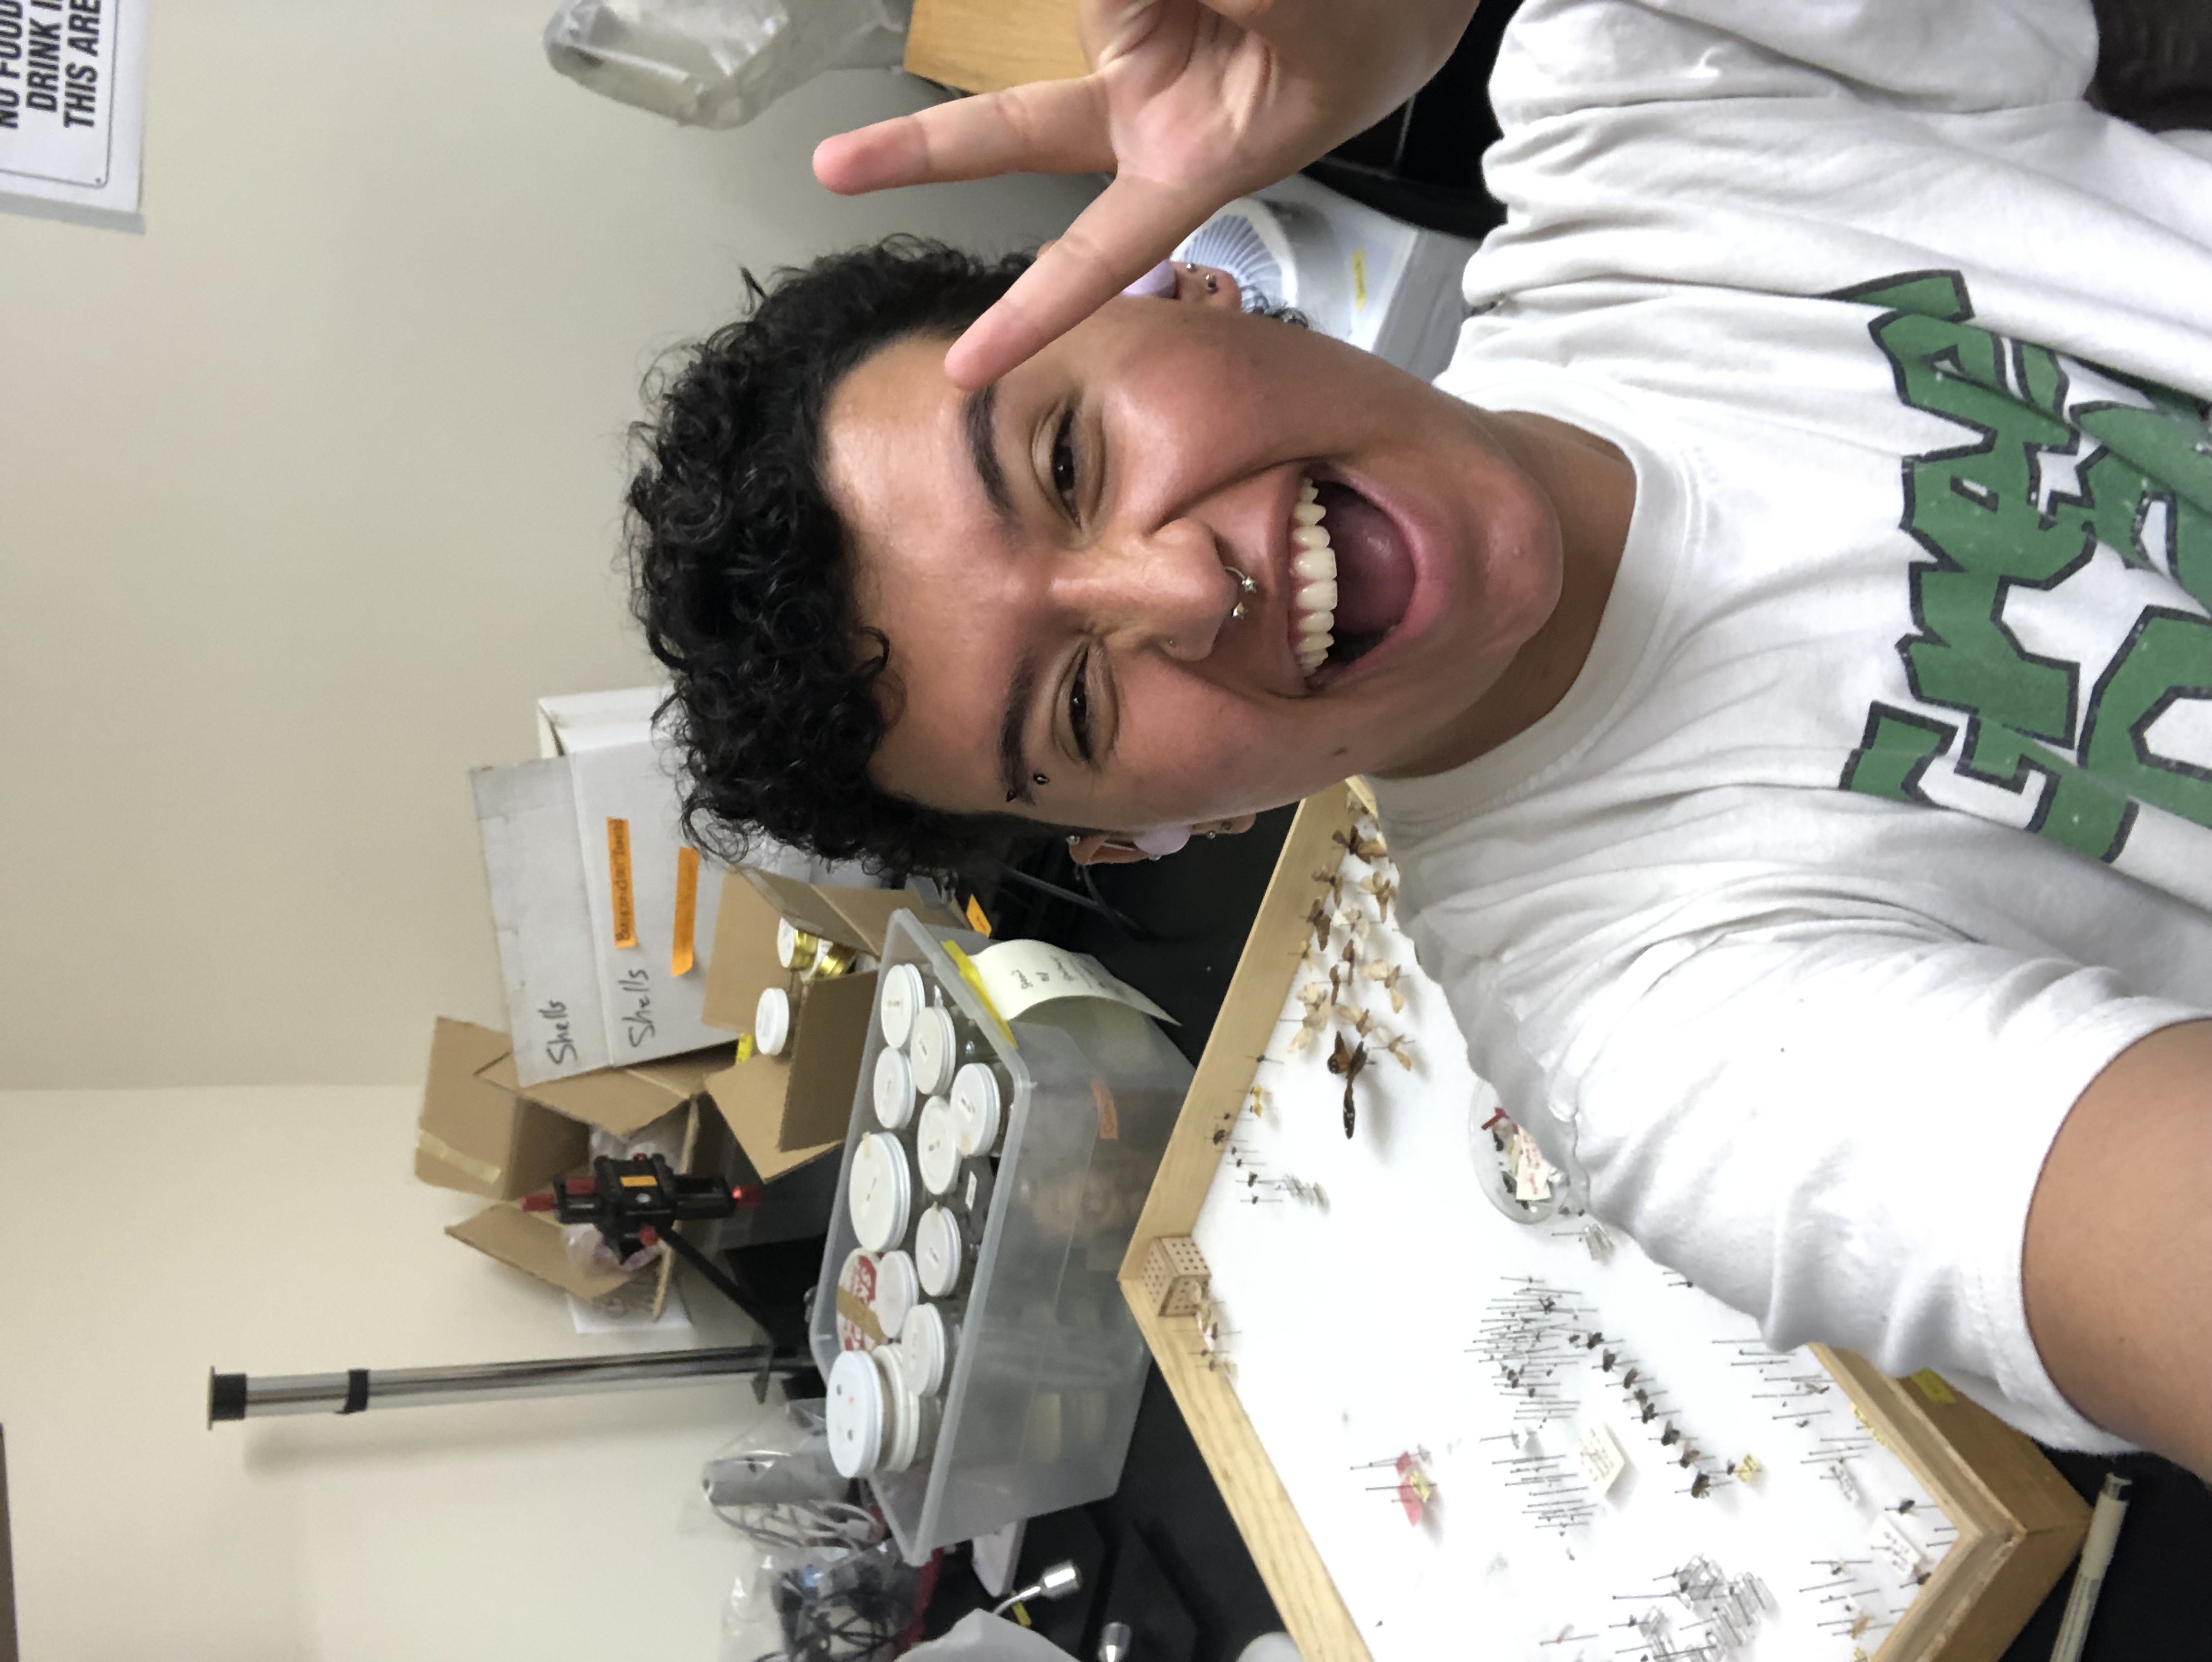 Miles is taking a selfie and flashing a peace sign. Behind Miles is a wooden box containing pinned insect specimens. Next to that box is a container filled with jars and other pieces of scientific equipment